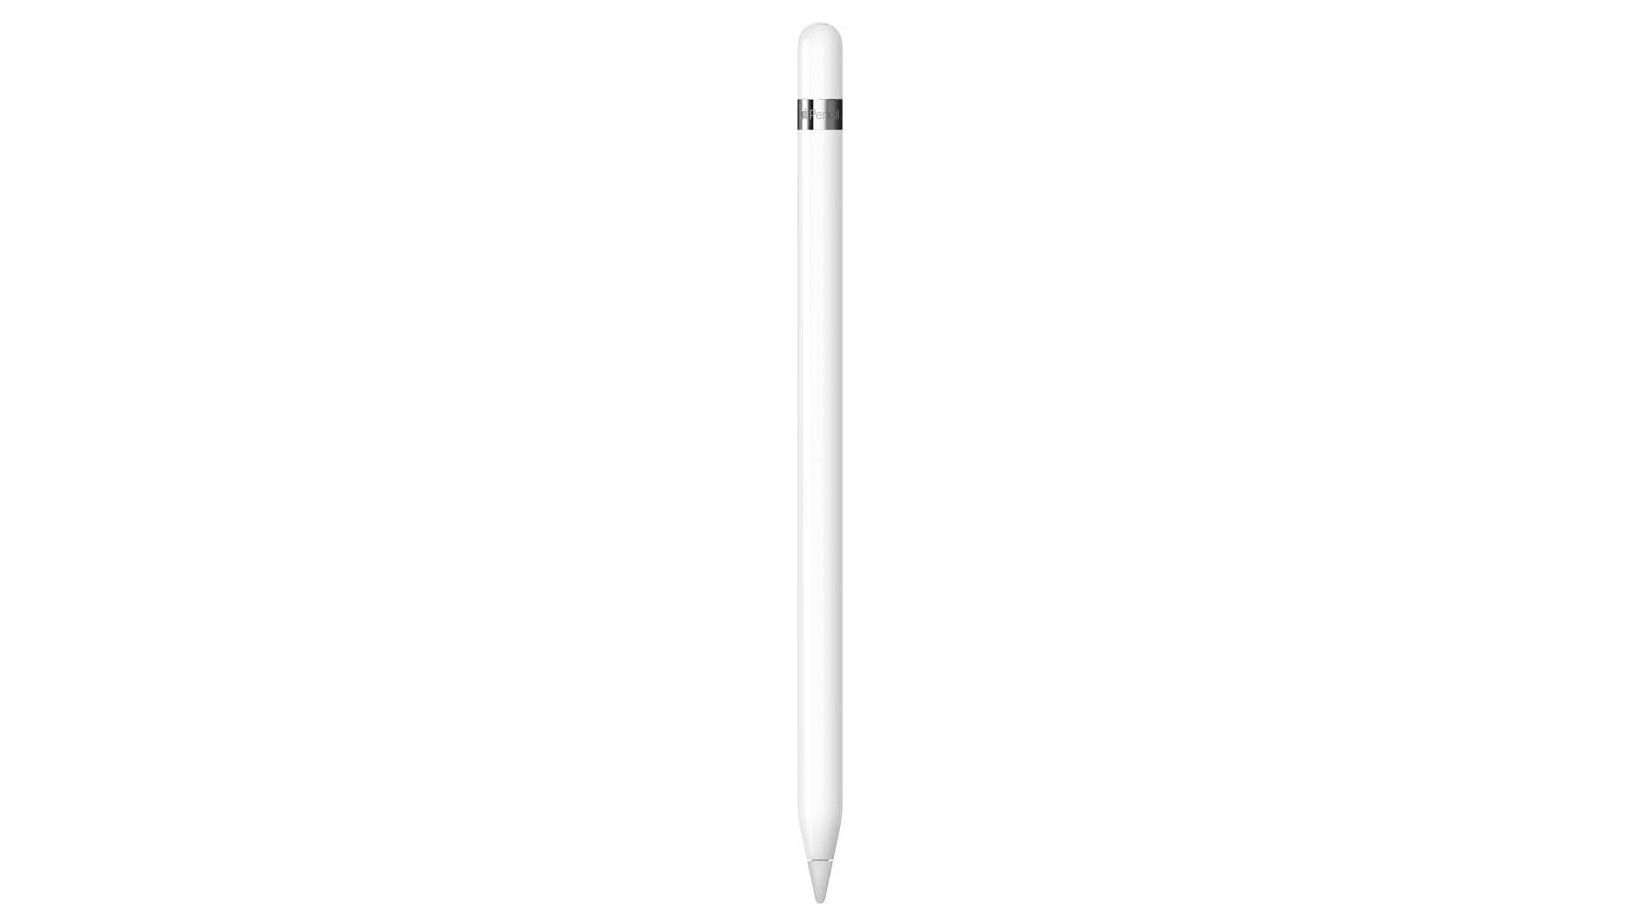 Apple Pencil with USB-C launched, price starts at $79